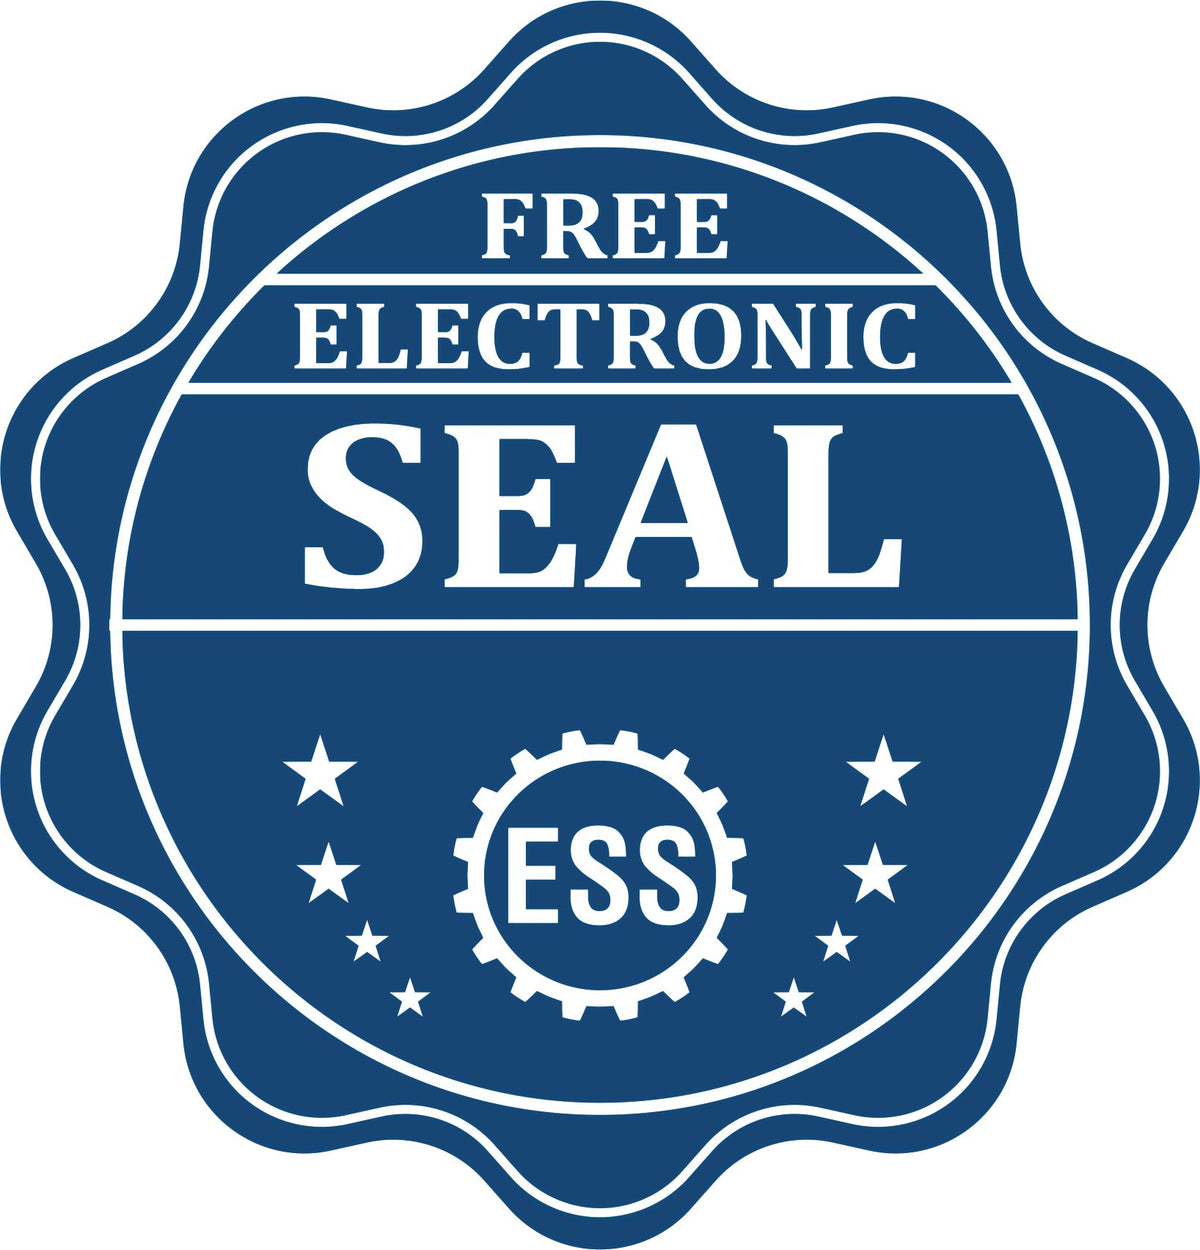 A badge showing a free electronic seal for the Hybrid Texas Geologist Seal with stars and the ESS gear on the emblem.